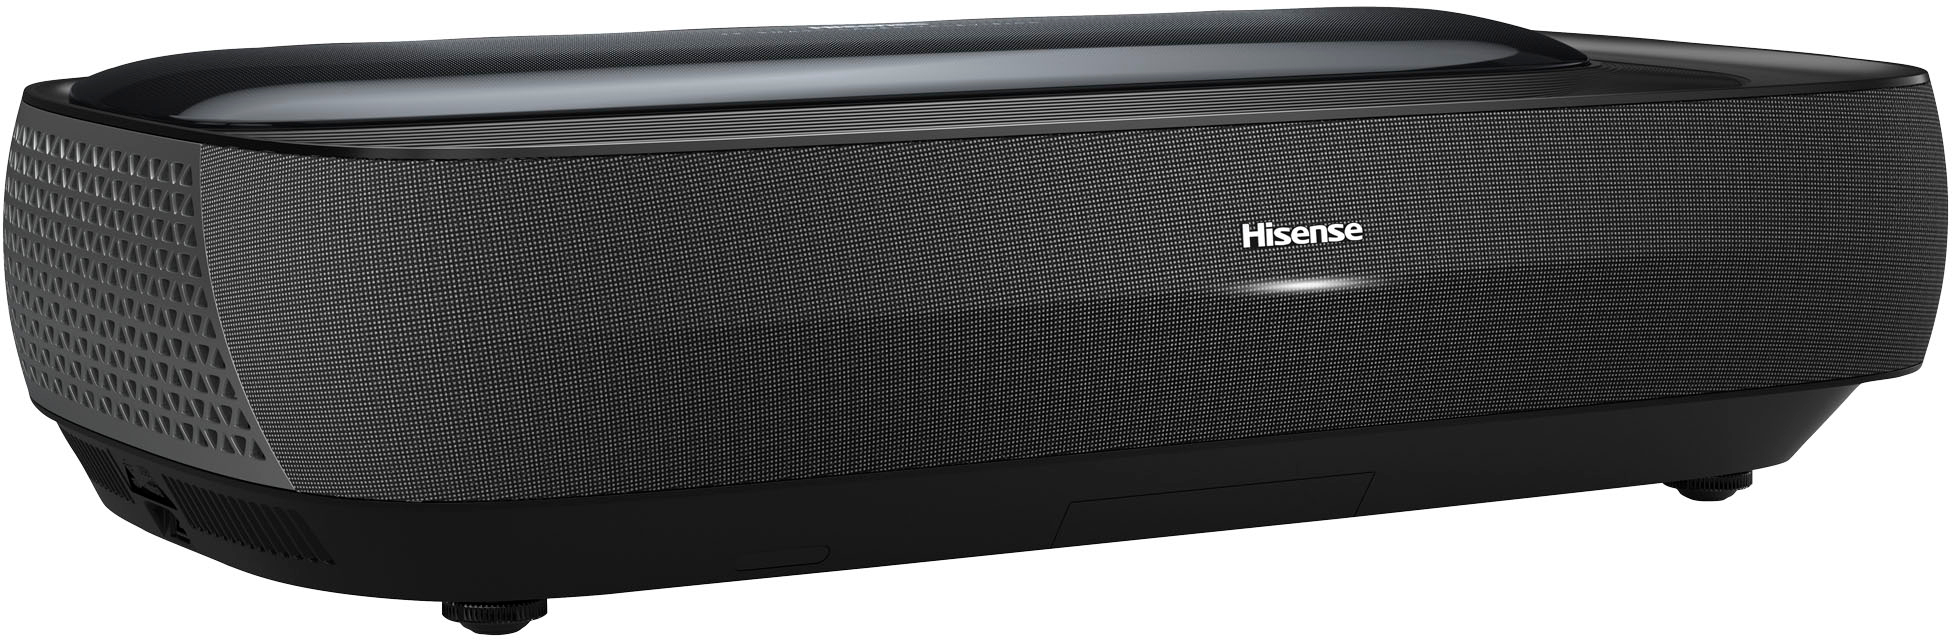 Left View: Hisense - L9G Laser TV Triple-Laser Ultra Short Throw Projector with 100" ALR Screen, 4K UHD, 3000  Lumens, HDR, Android TV - Black